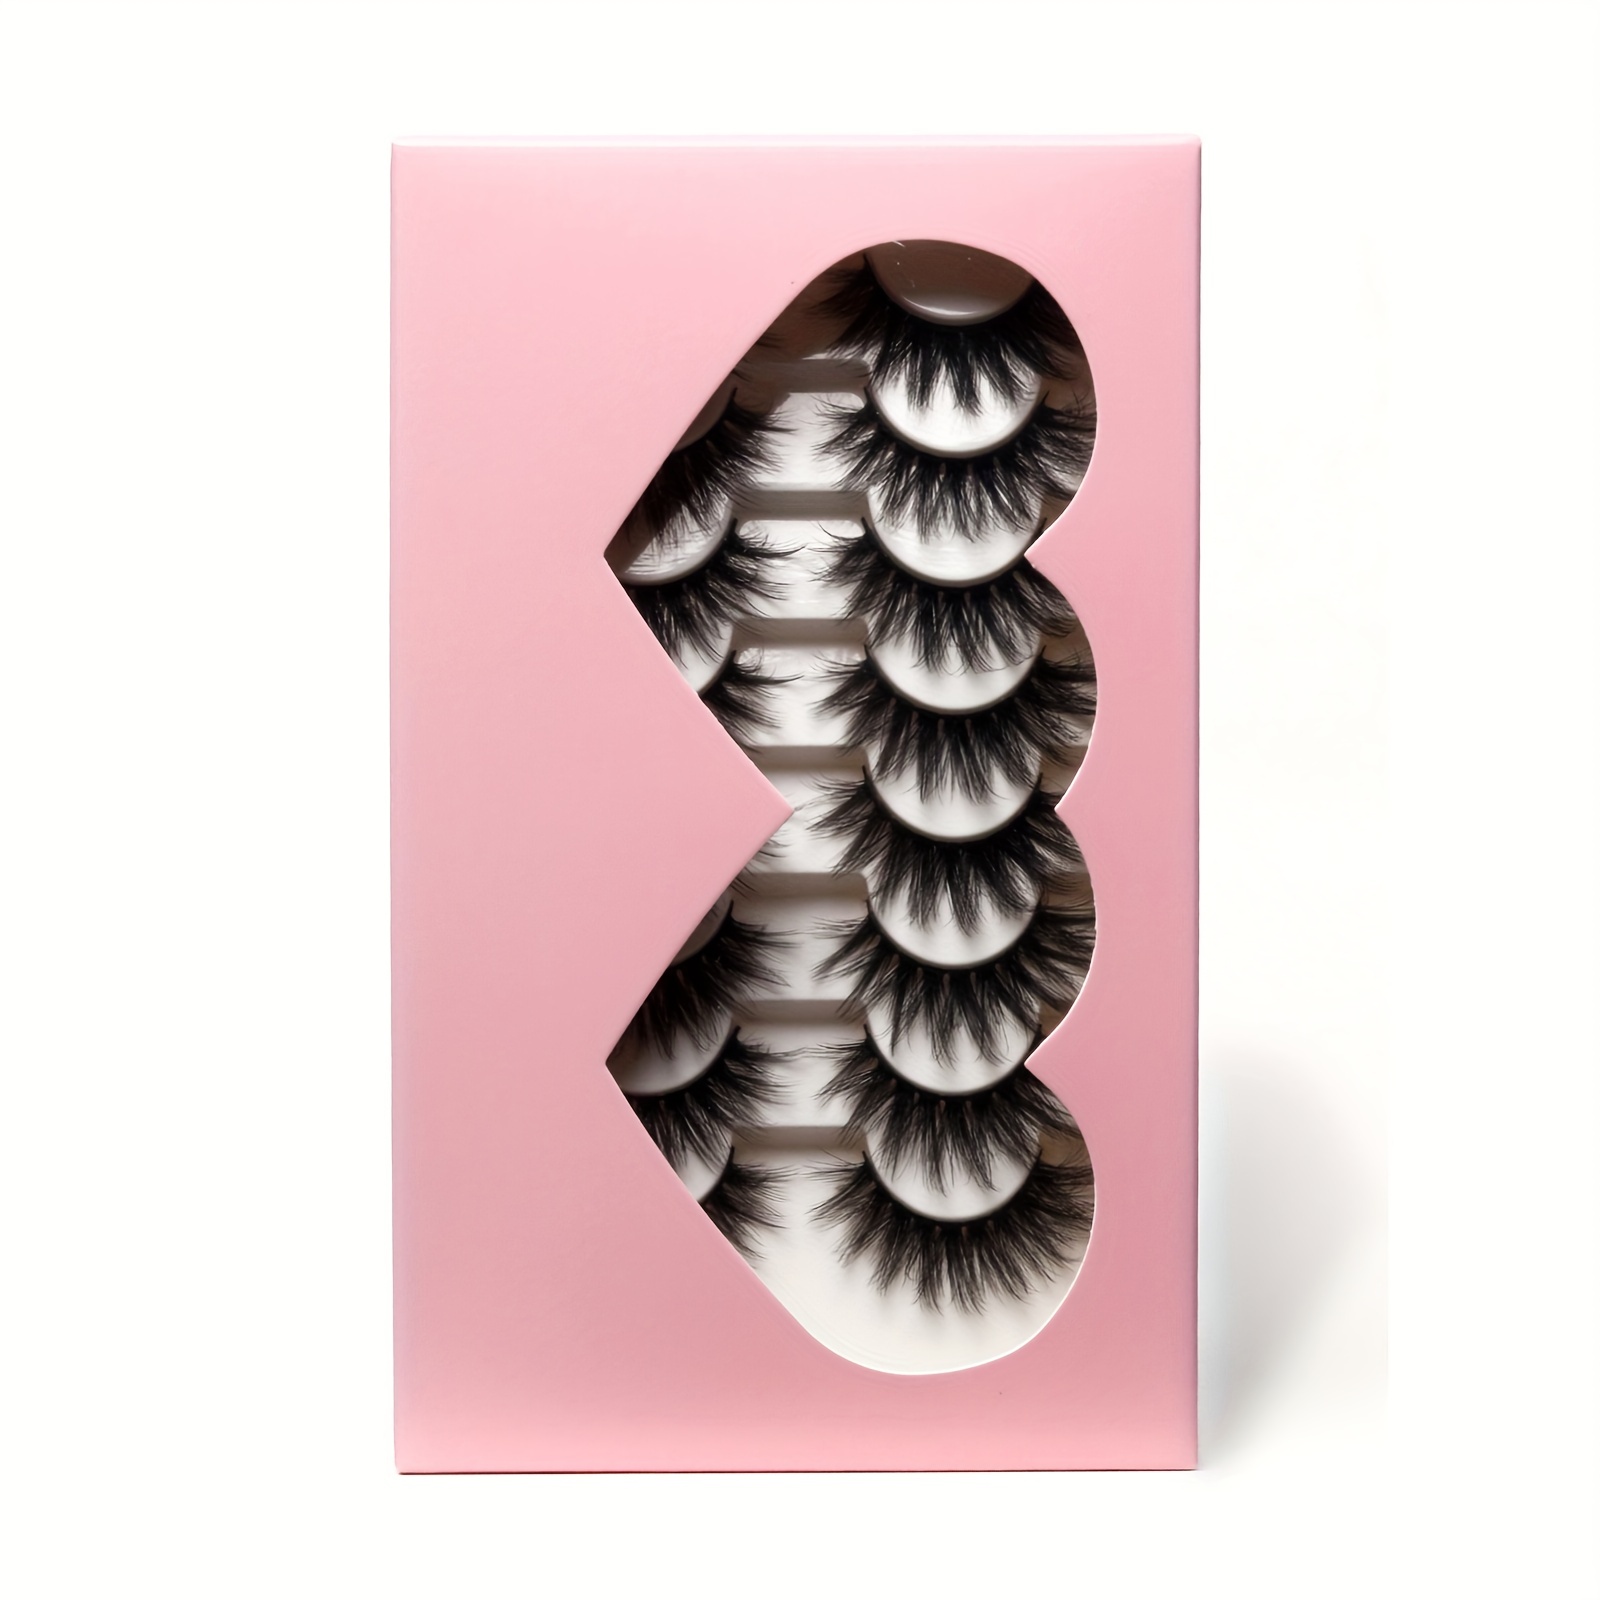 

8 Pairs Natural Fluffy 3d Faux Mink Lashes - Handmade C Curling Volume Lashes For A Bold And Beautiful Look